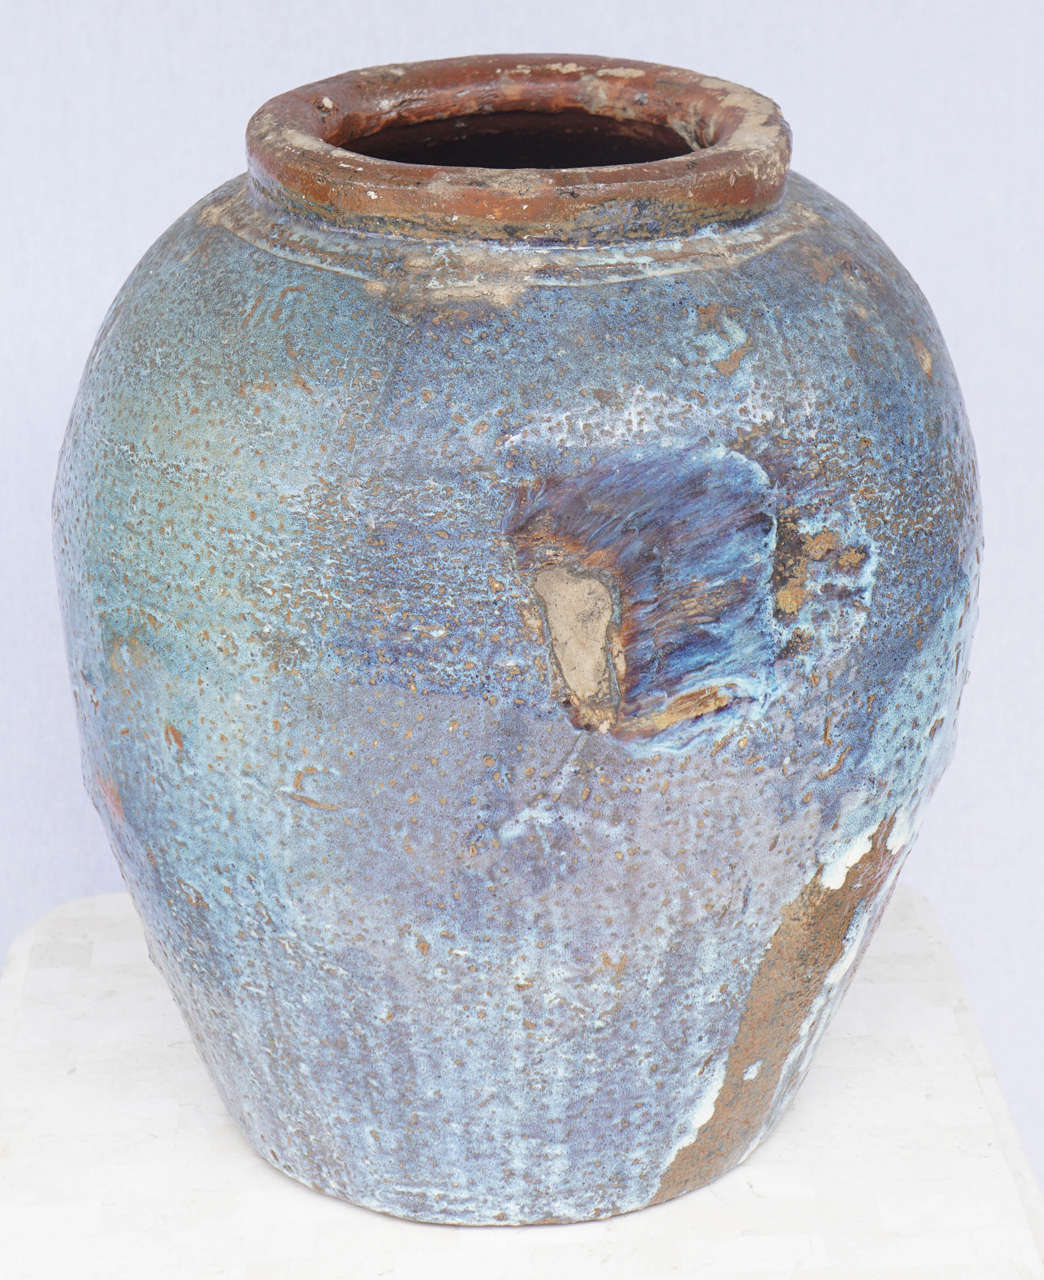 A large blue glazed jug from China  from the 19th century.